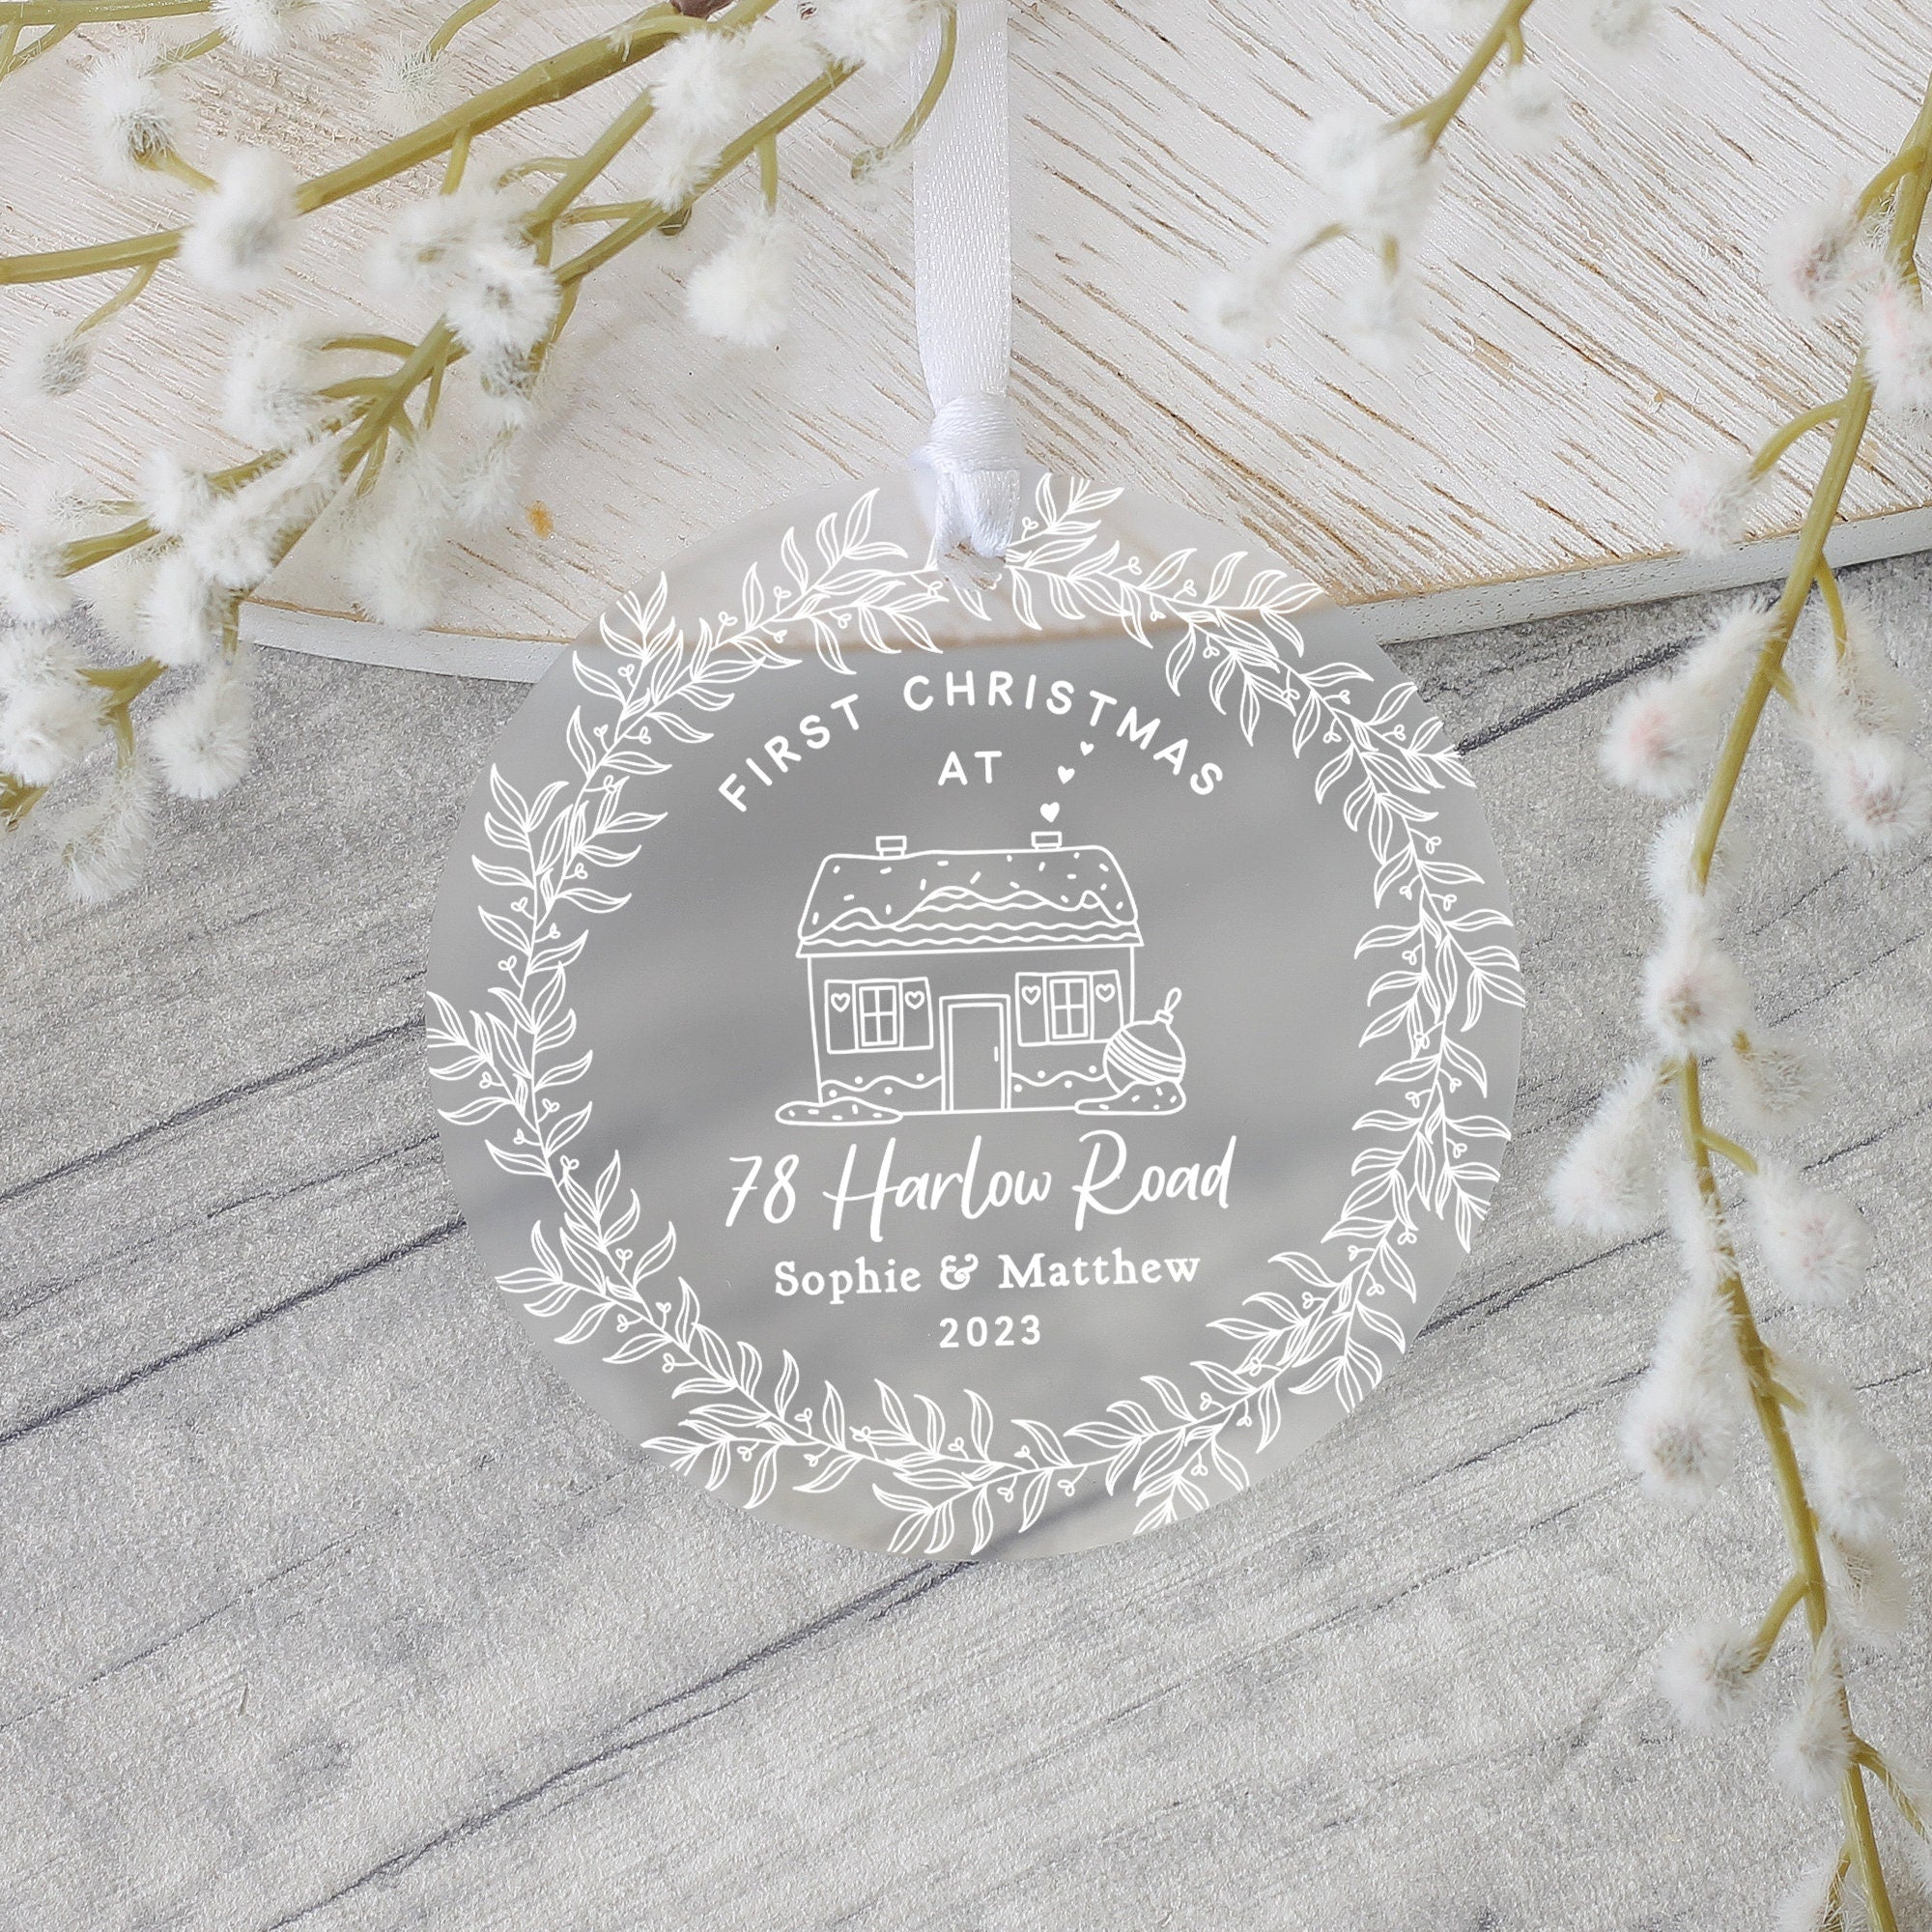 Personalised First Christmas in New Home Gift Frosted Acrylic